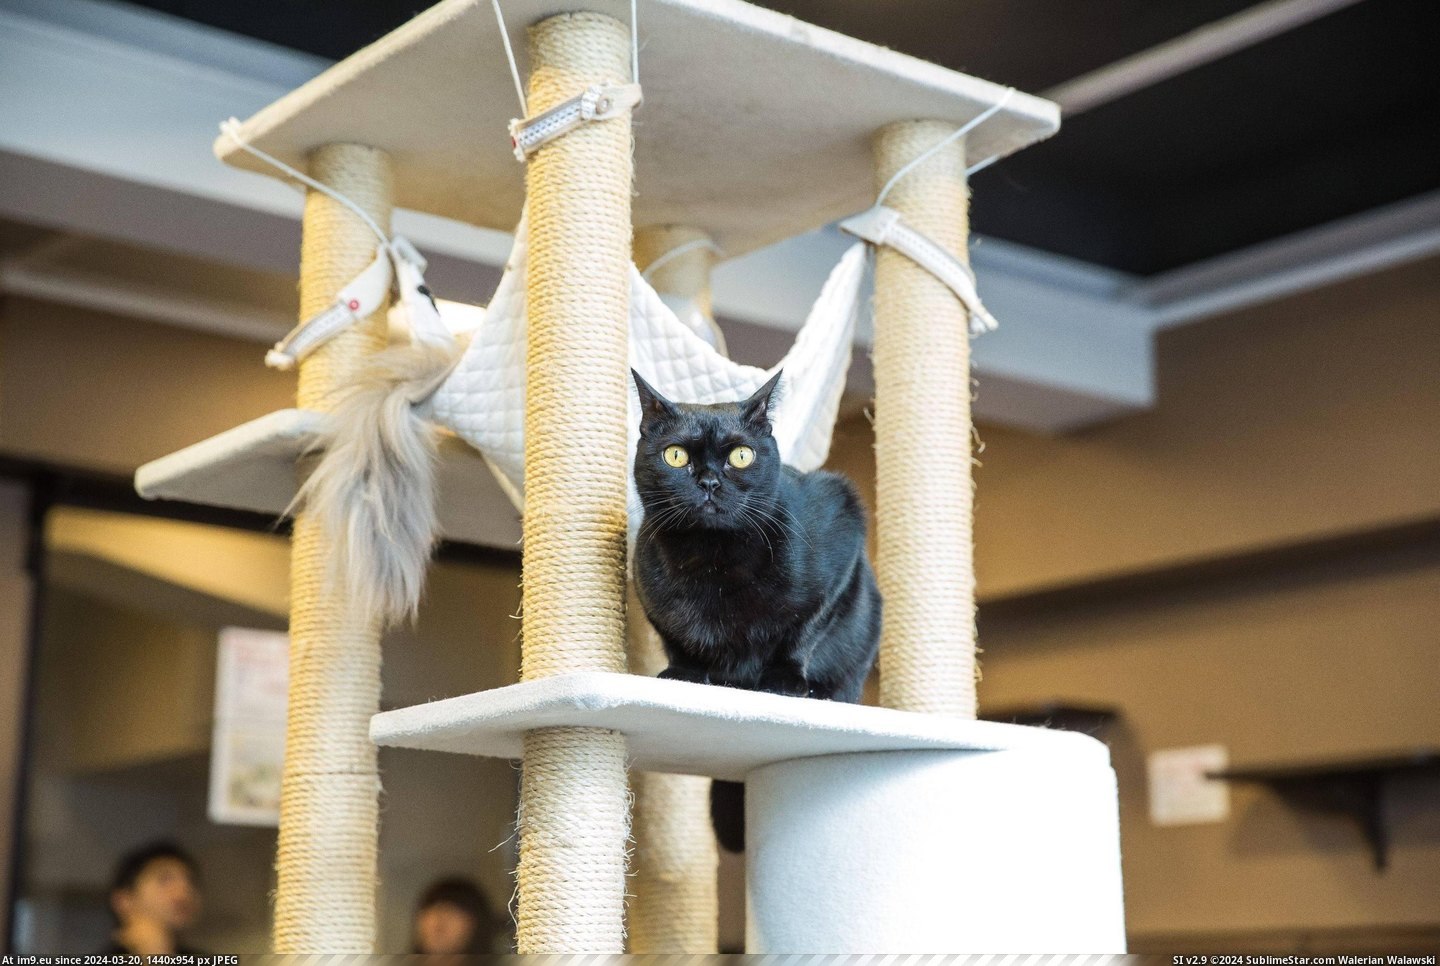 #Cats #Cat #Visited #Tokyo #Cafe [Cats] I visited a cat cafe in Tokyo... 4 Pic. (Изображение из альбом My r/CATS favs))